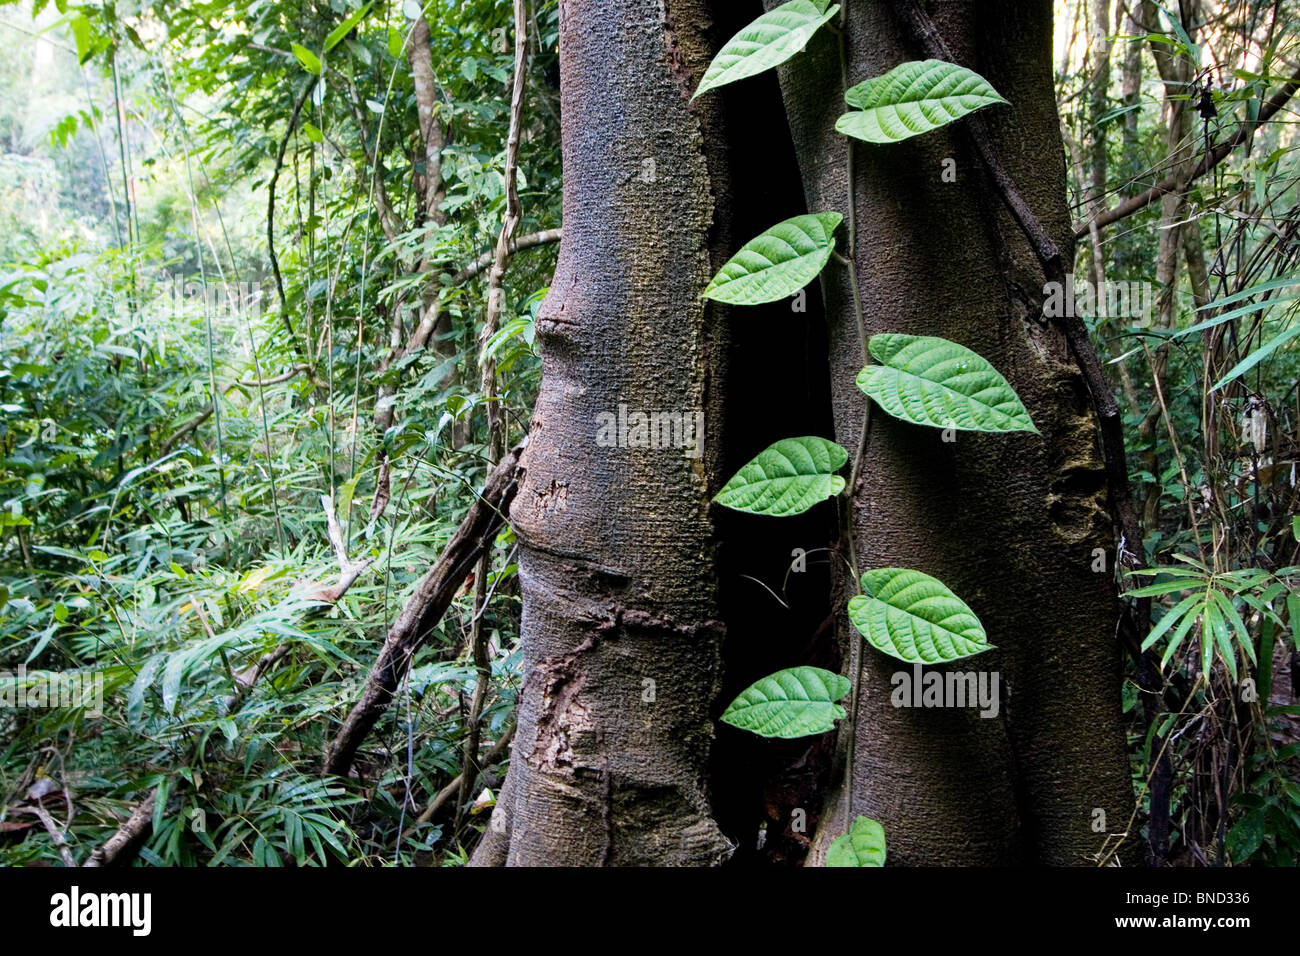 A green vine climbing on the trunk of a rainforest tree, Thailand Stock Photo